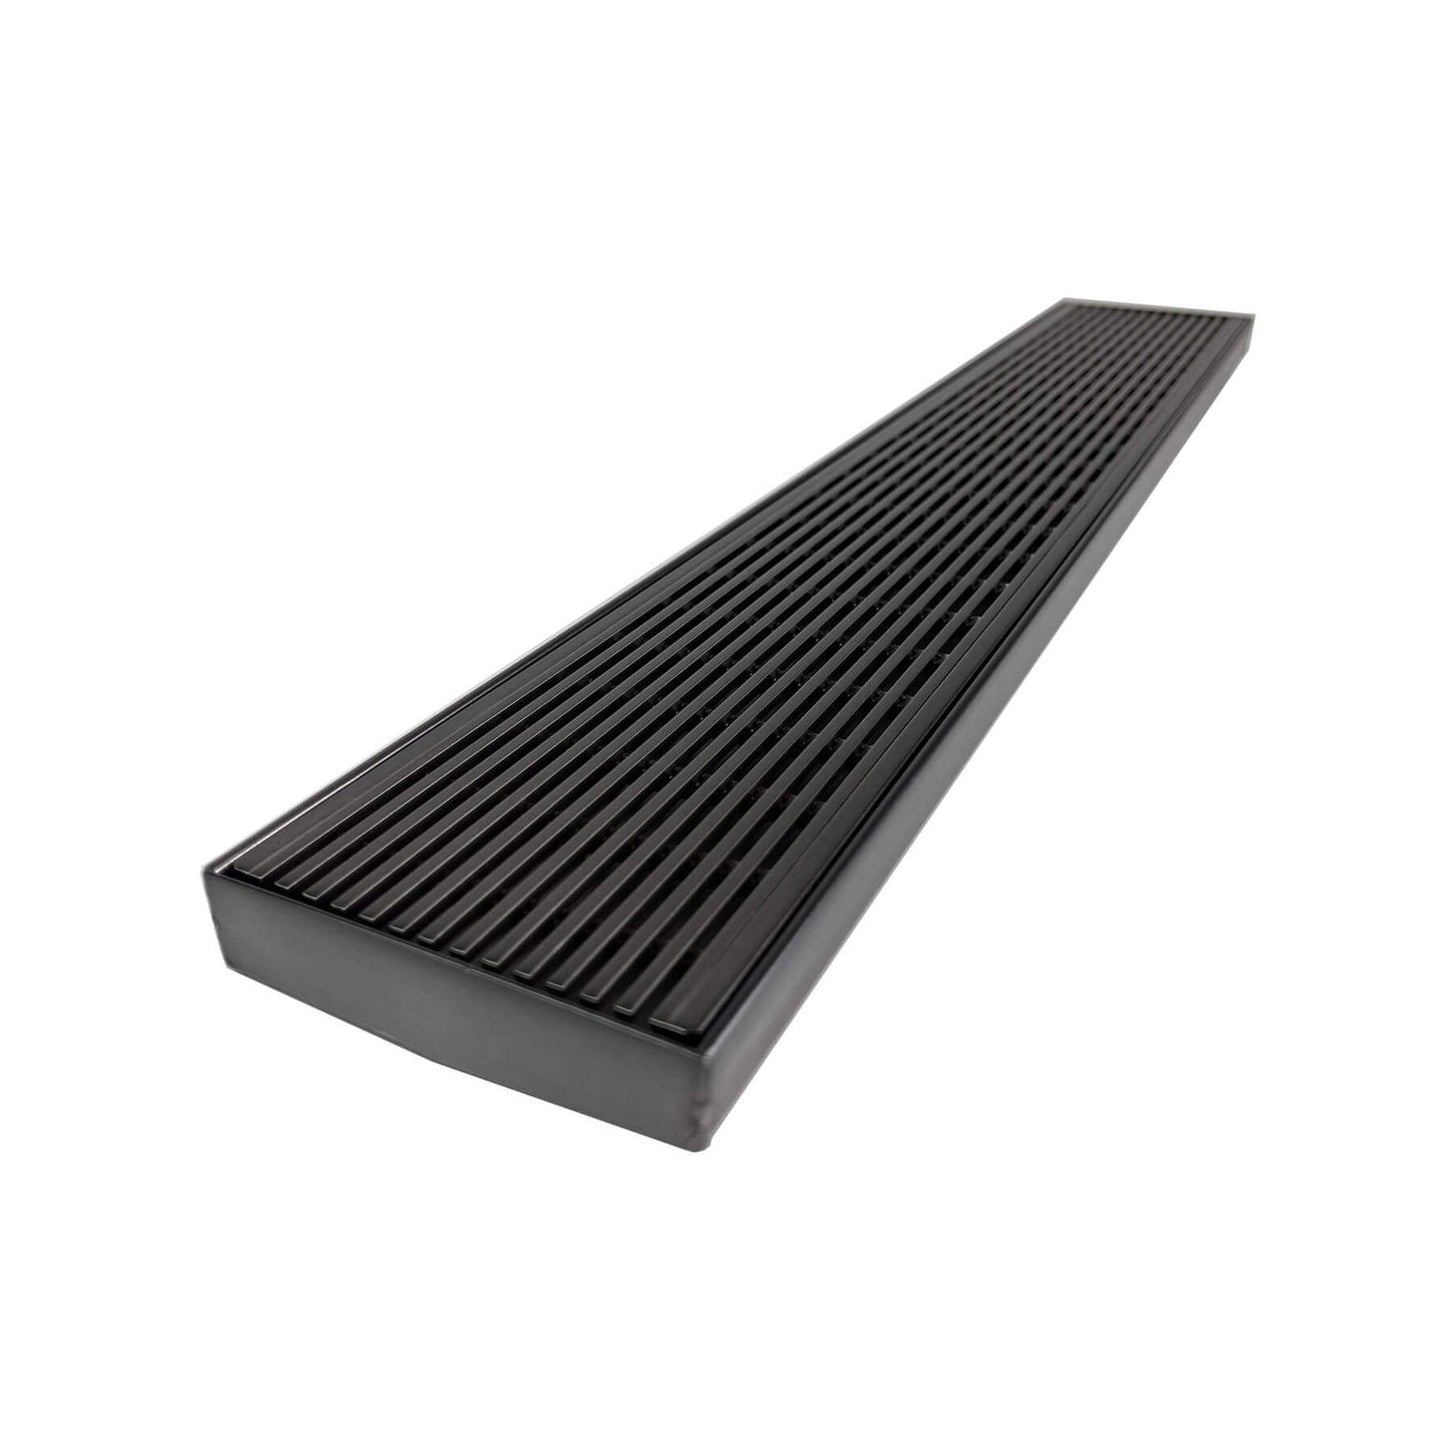 Standard Length Wedge Wire Grate and Channel Drain - Gunmetal Grey